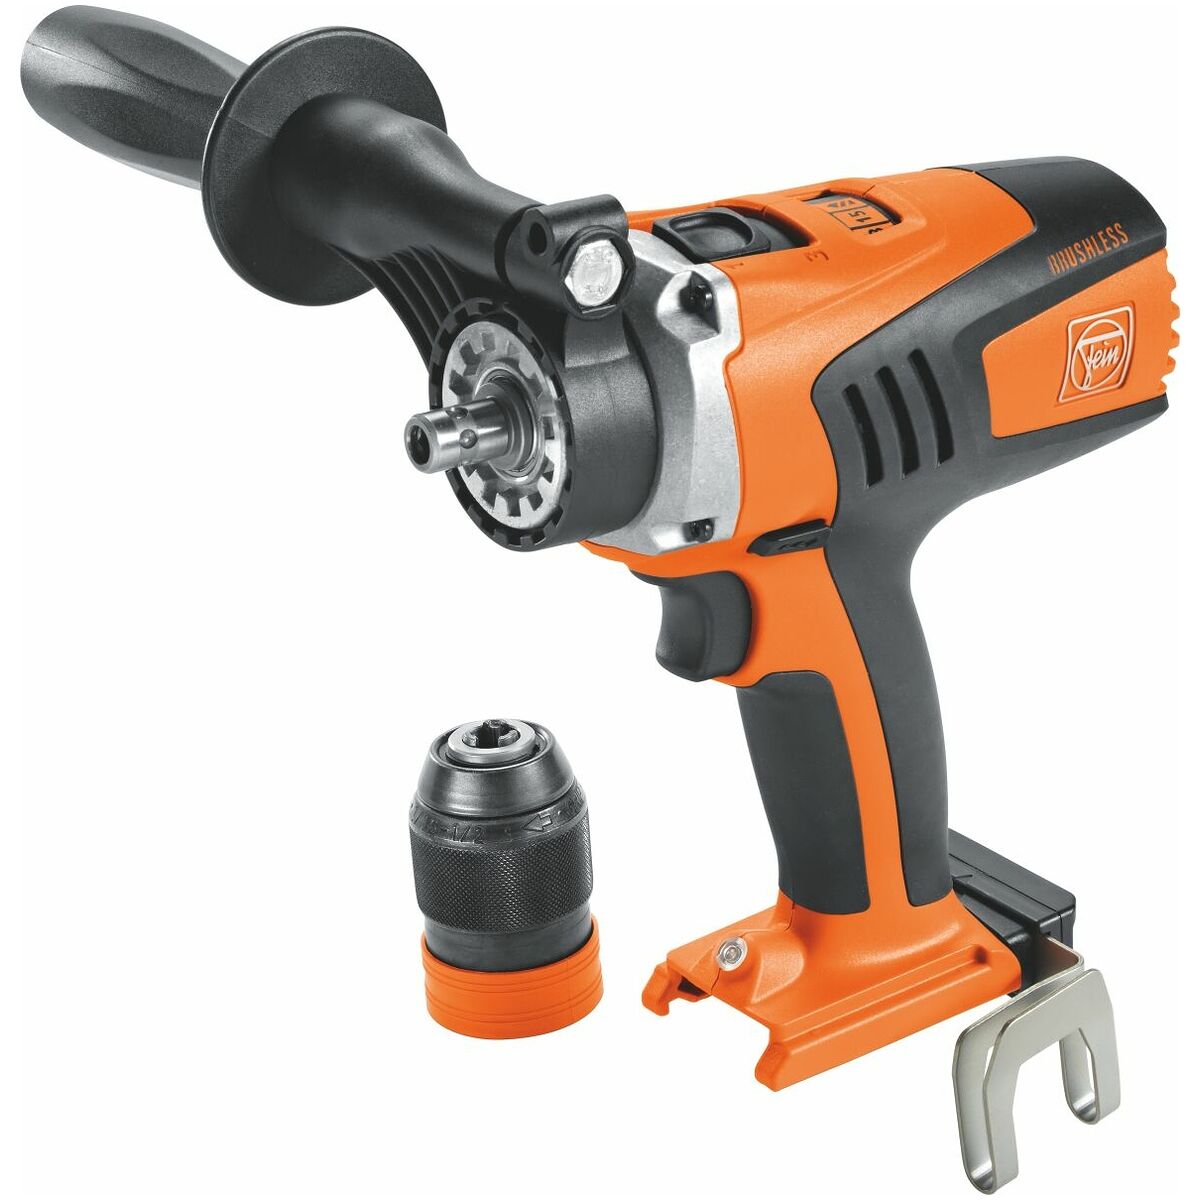 Cordless drill/driver without rechargeable battery and charger